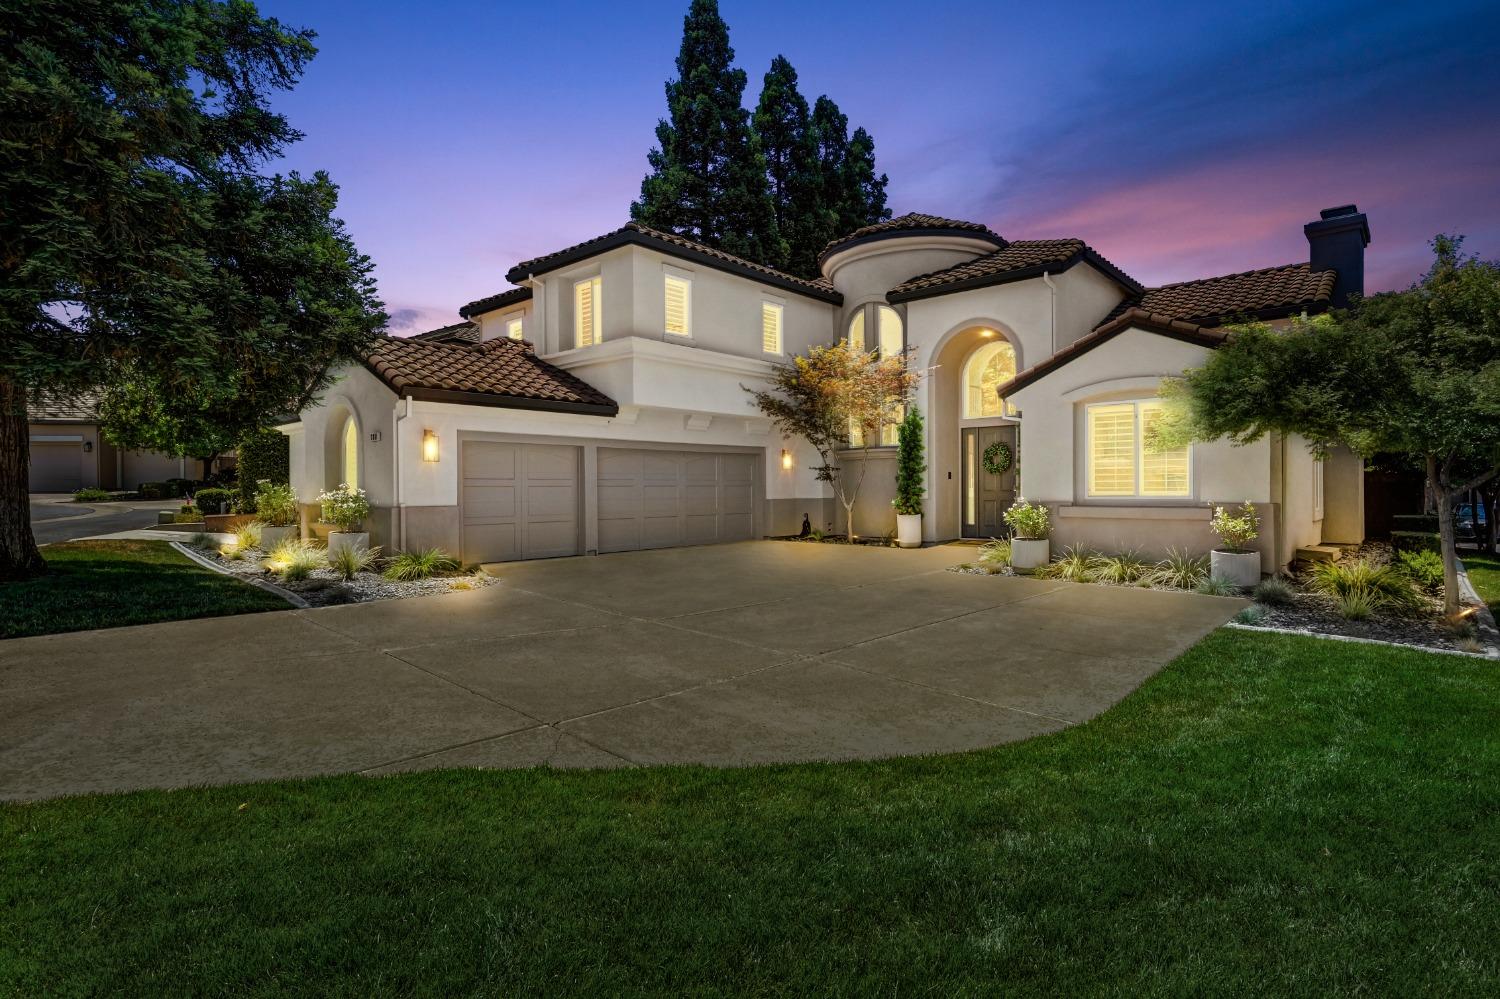 Photo of 300 Alwoodley Ct in Roseville, CA